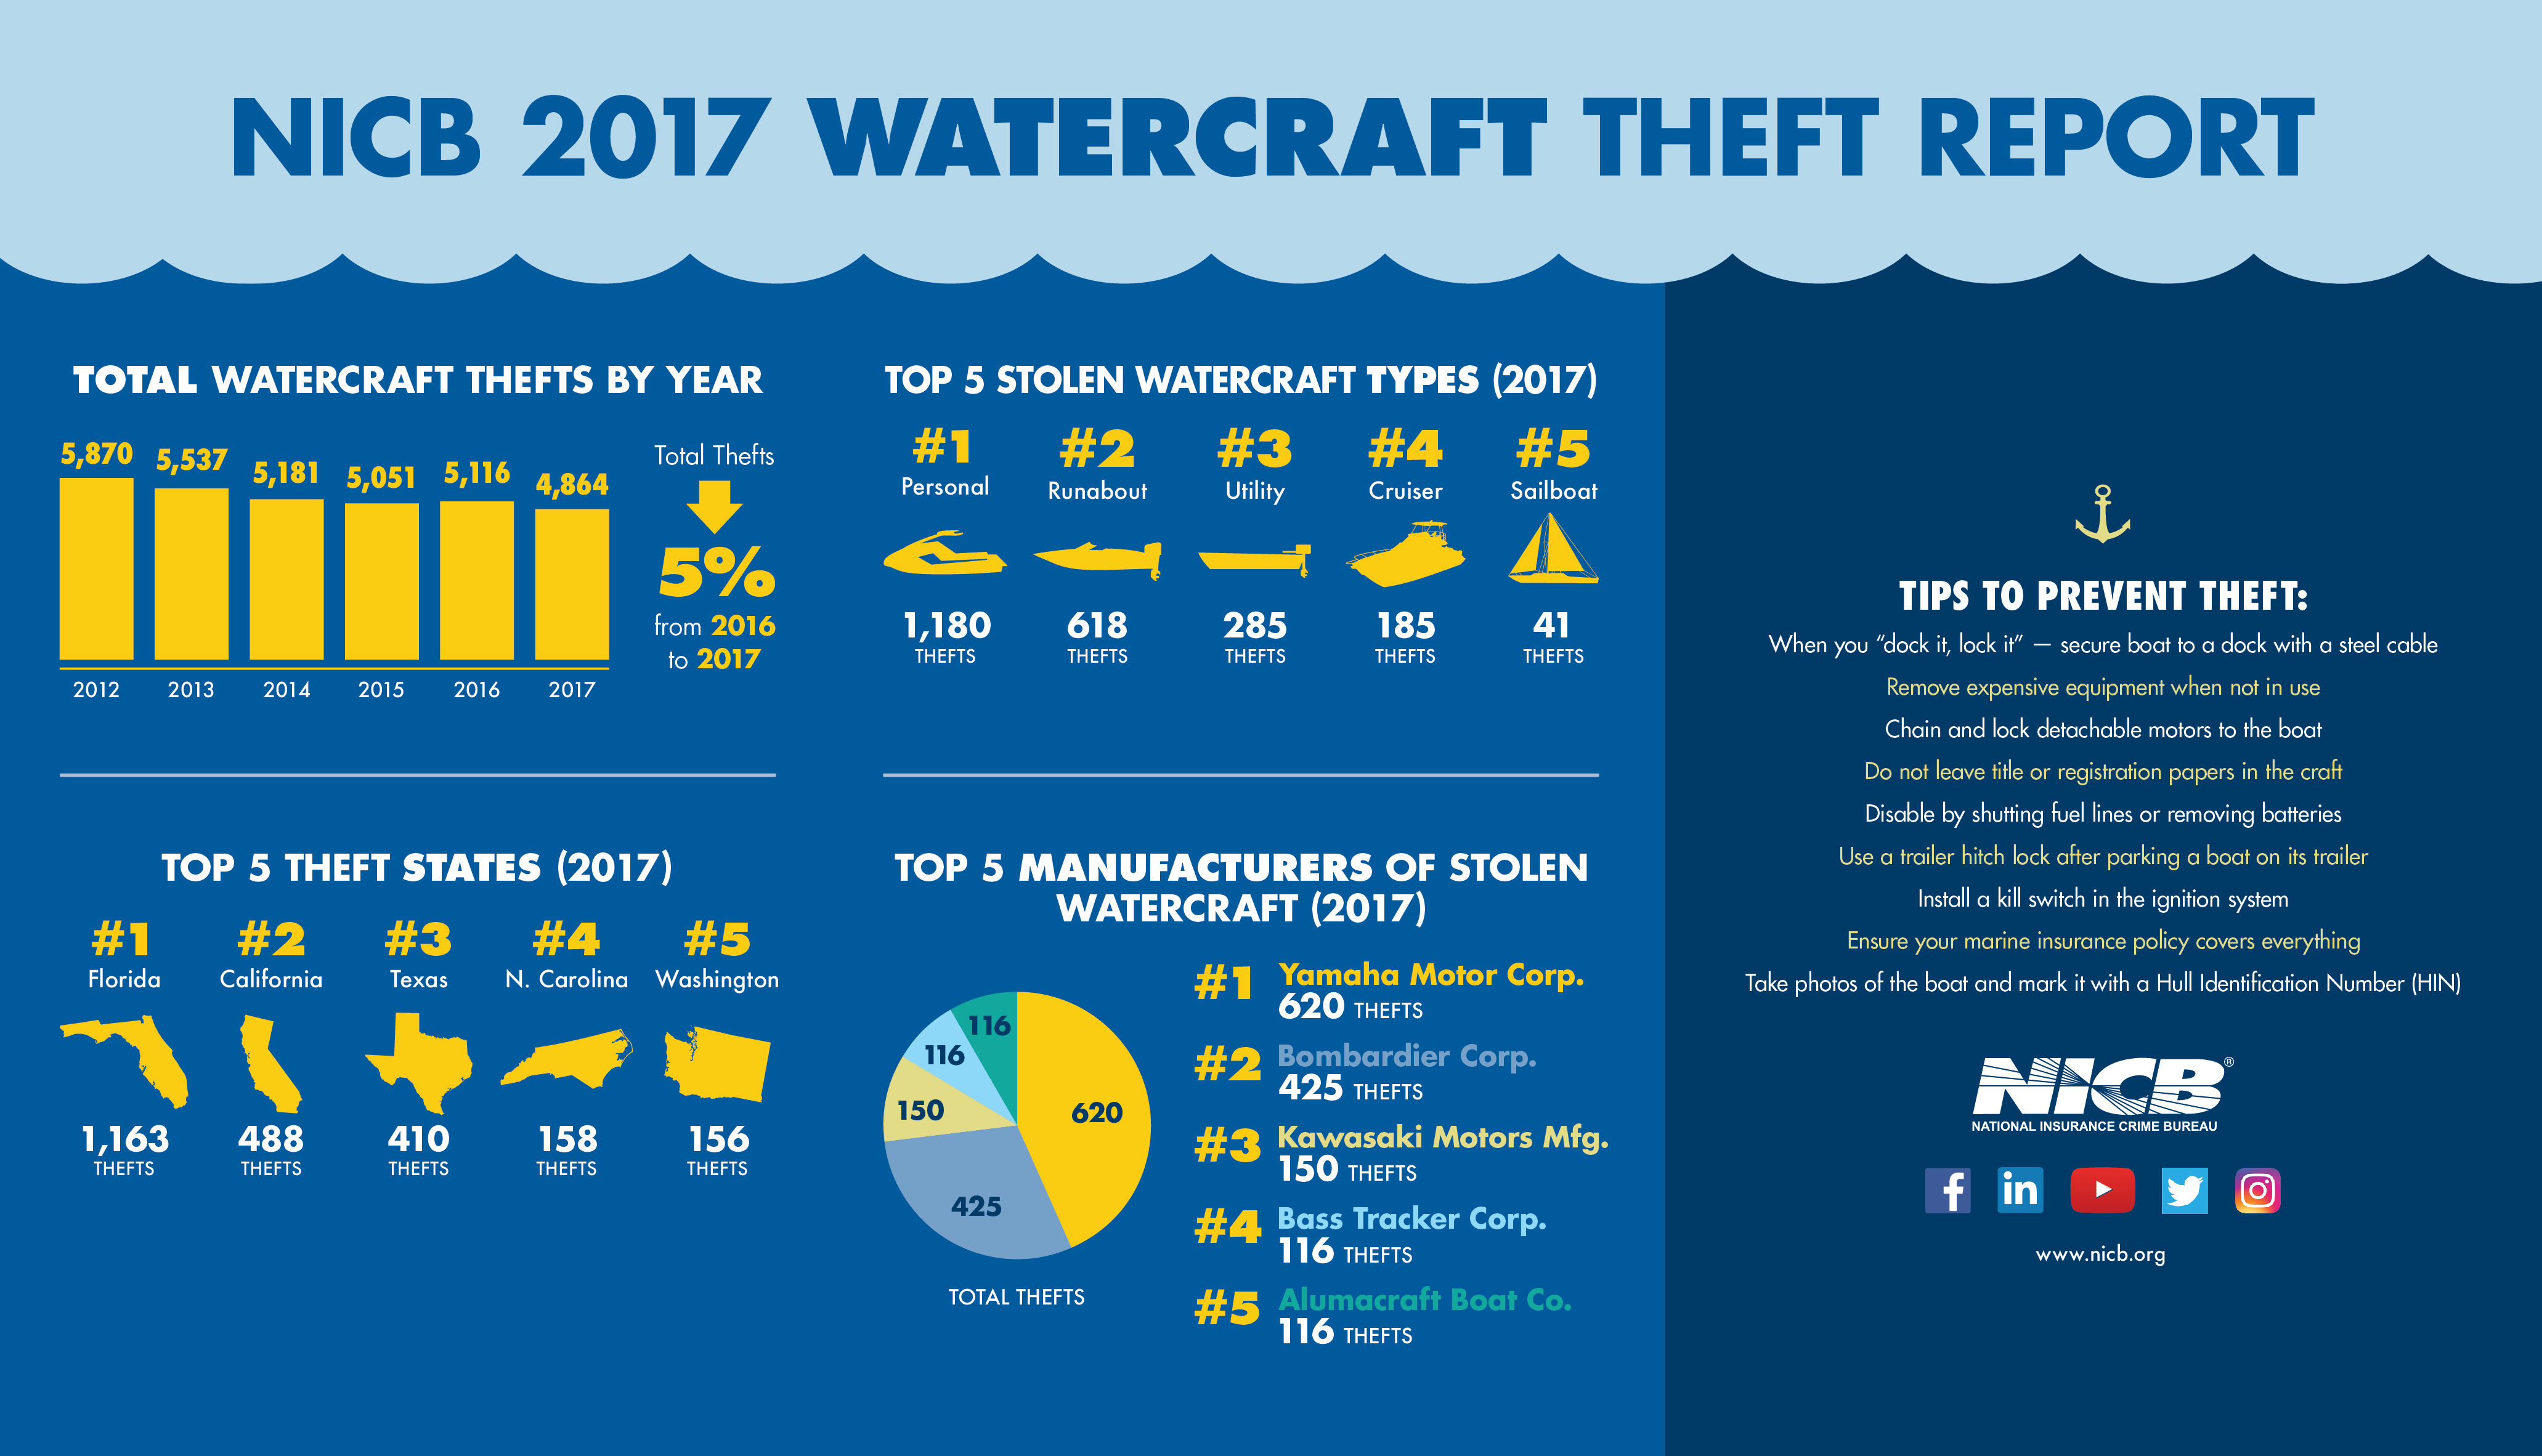 NICB 2017 Watercraft Theft Report Infographic